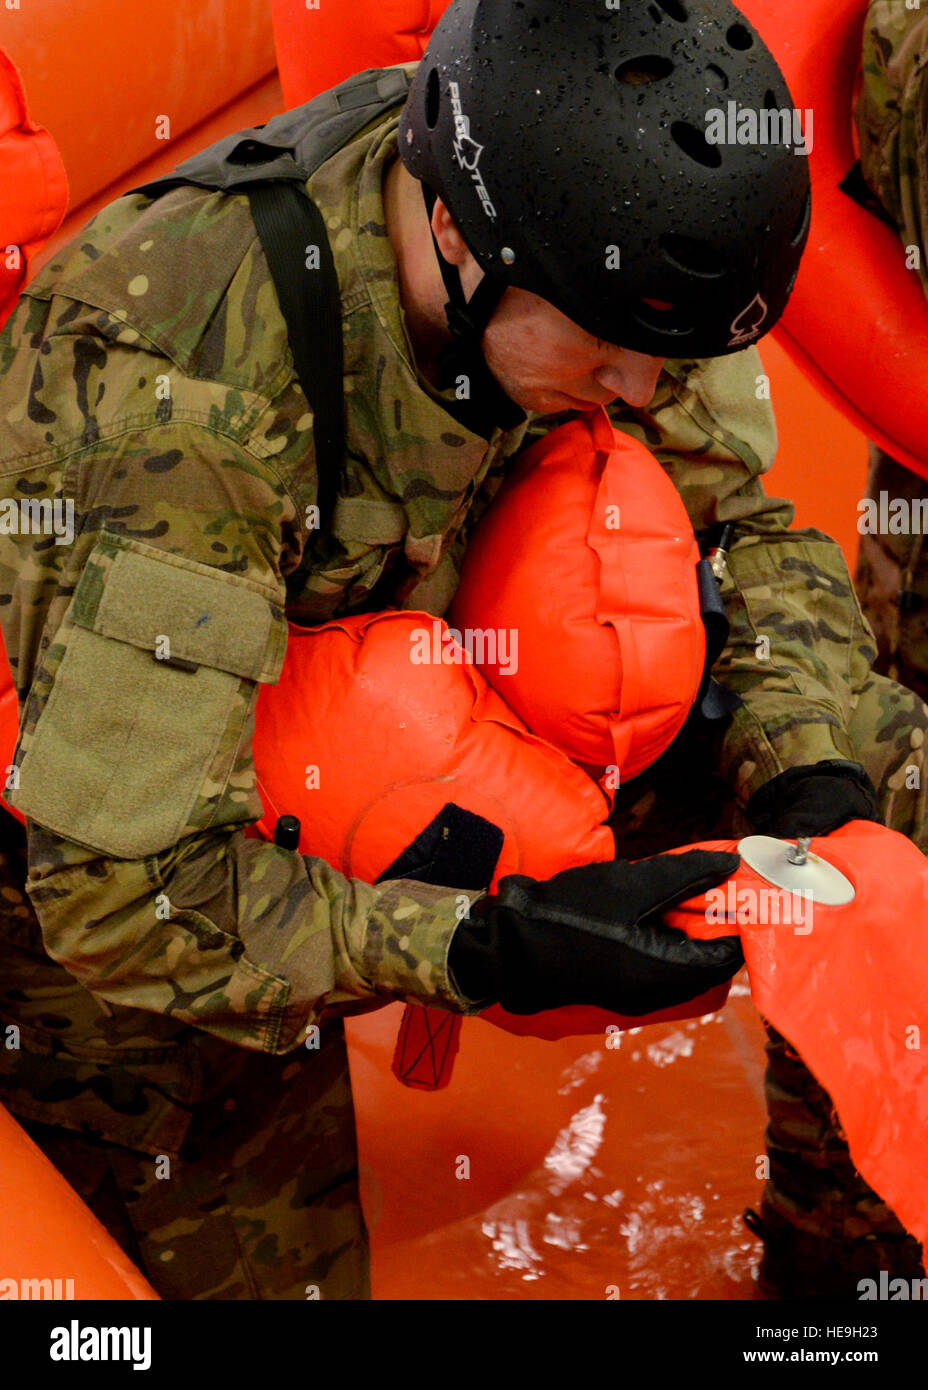 U.S. Air Force Senior Airman Seth Ewing, 352nd Special Operations Support Squadron Deployed Aircraft Ground Response Element team member from Front Royal, Va., examines a life preserver on an F-2B 20-man life raft during a Survival, Evasion, Resistance and Escape exercise Feb. 26, 2015, at Lowestoft College in Norfolk, England. SERE specialists conduct monthly water survival training to keep required Airman up-to-date on current requirements and protocols.  Senior Airman Victoria H. Taylor Stock Photo